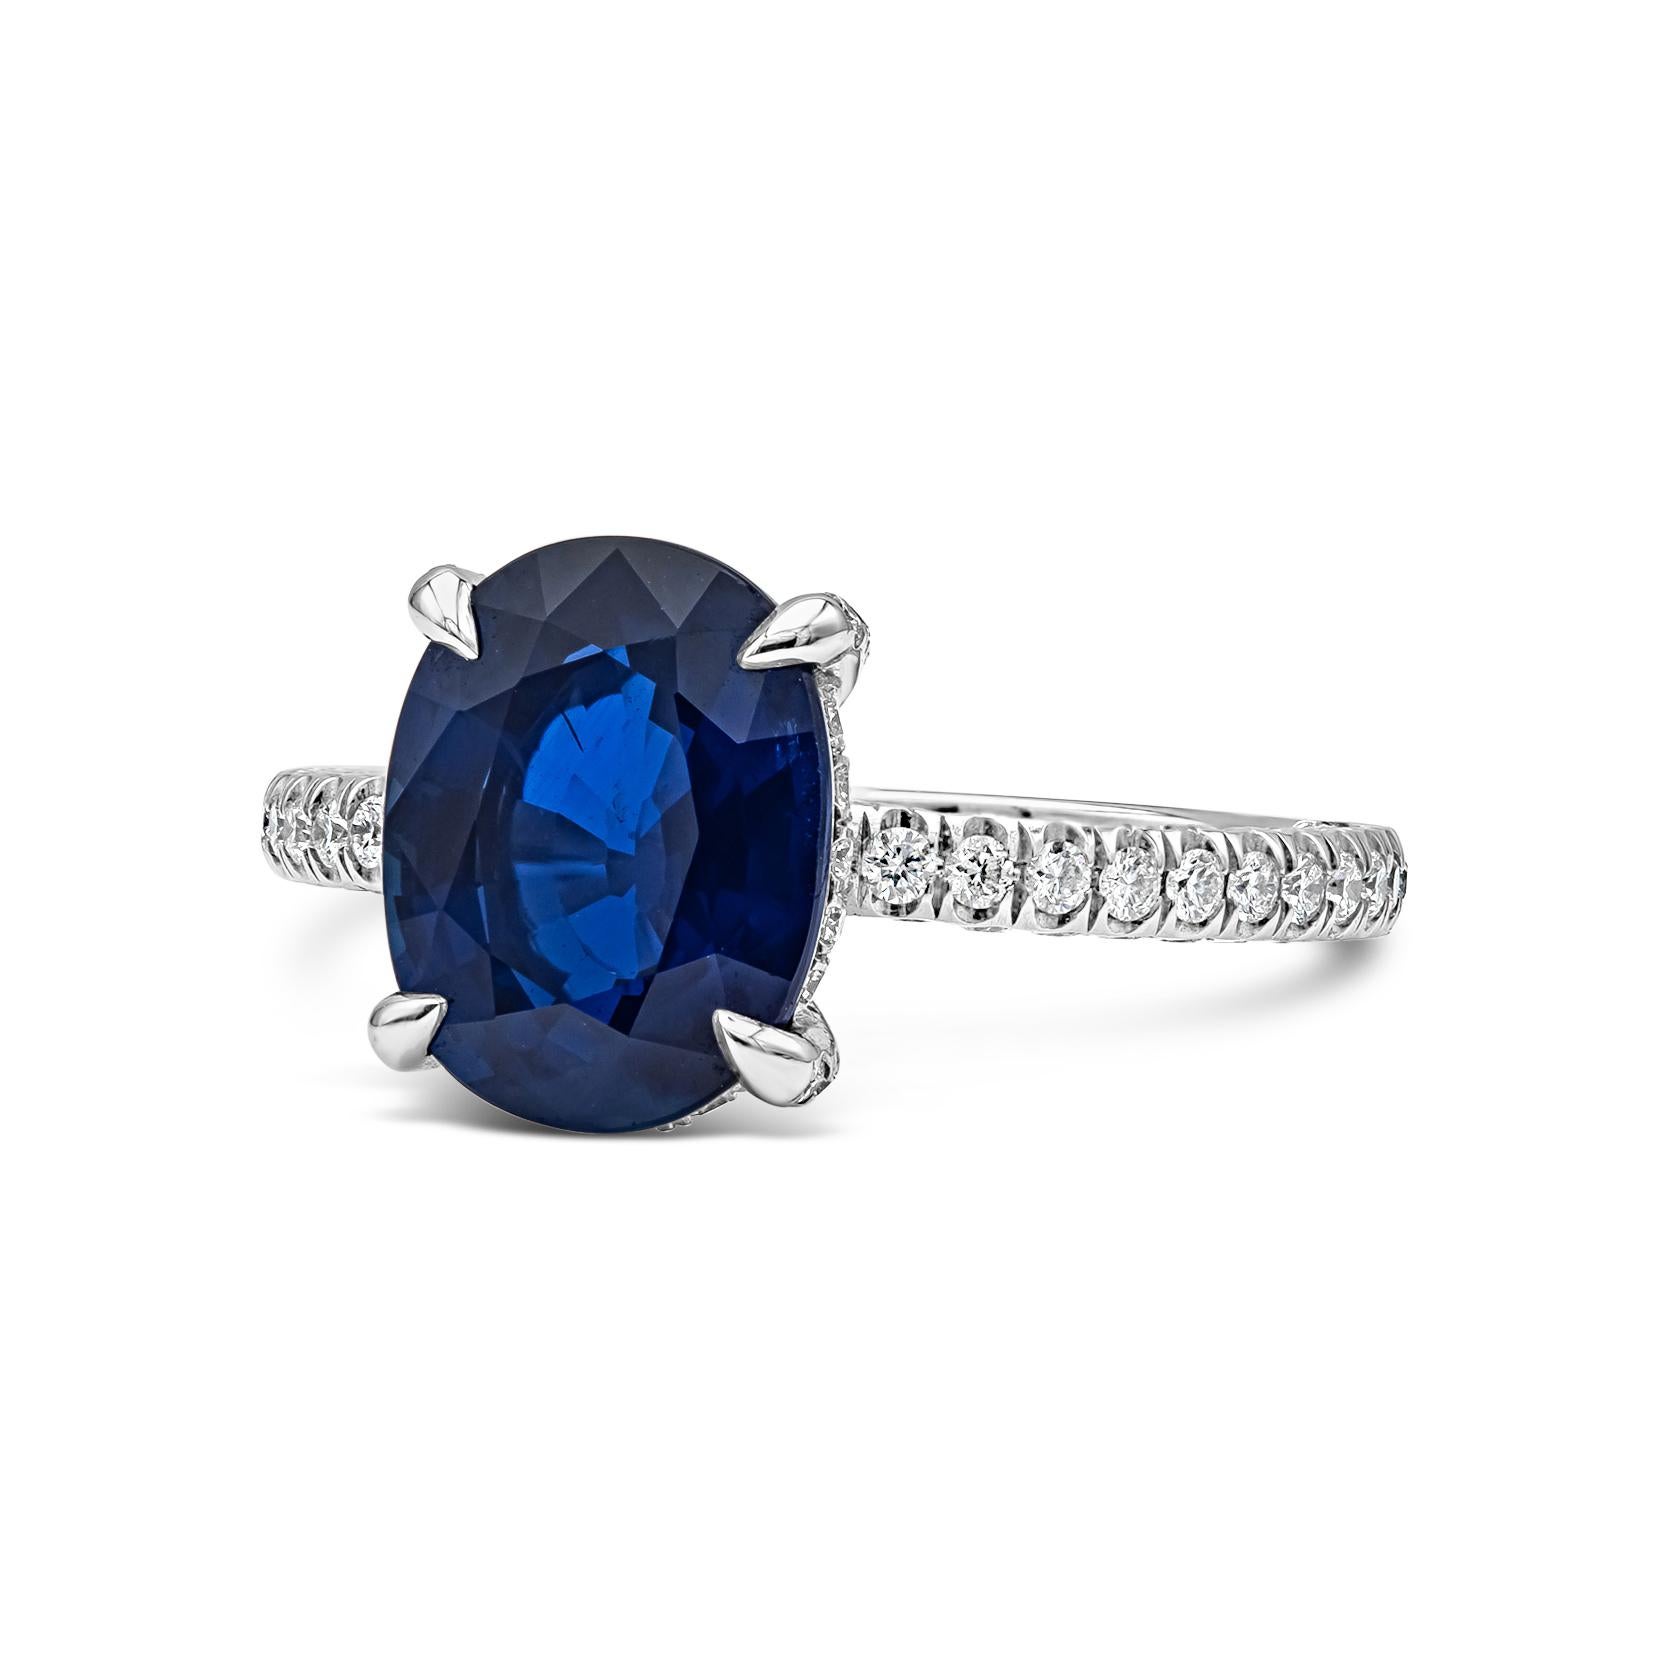 This beautiful and color-rich engagement ring features a 3.84 carats natural oval shaped blue sapphire center stone that GIA certified as Blue in color and does not indicate any heat treatment, set in a classic four prong basket setting. Origin from